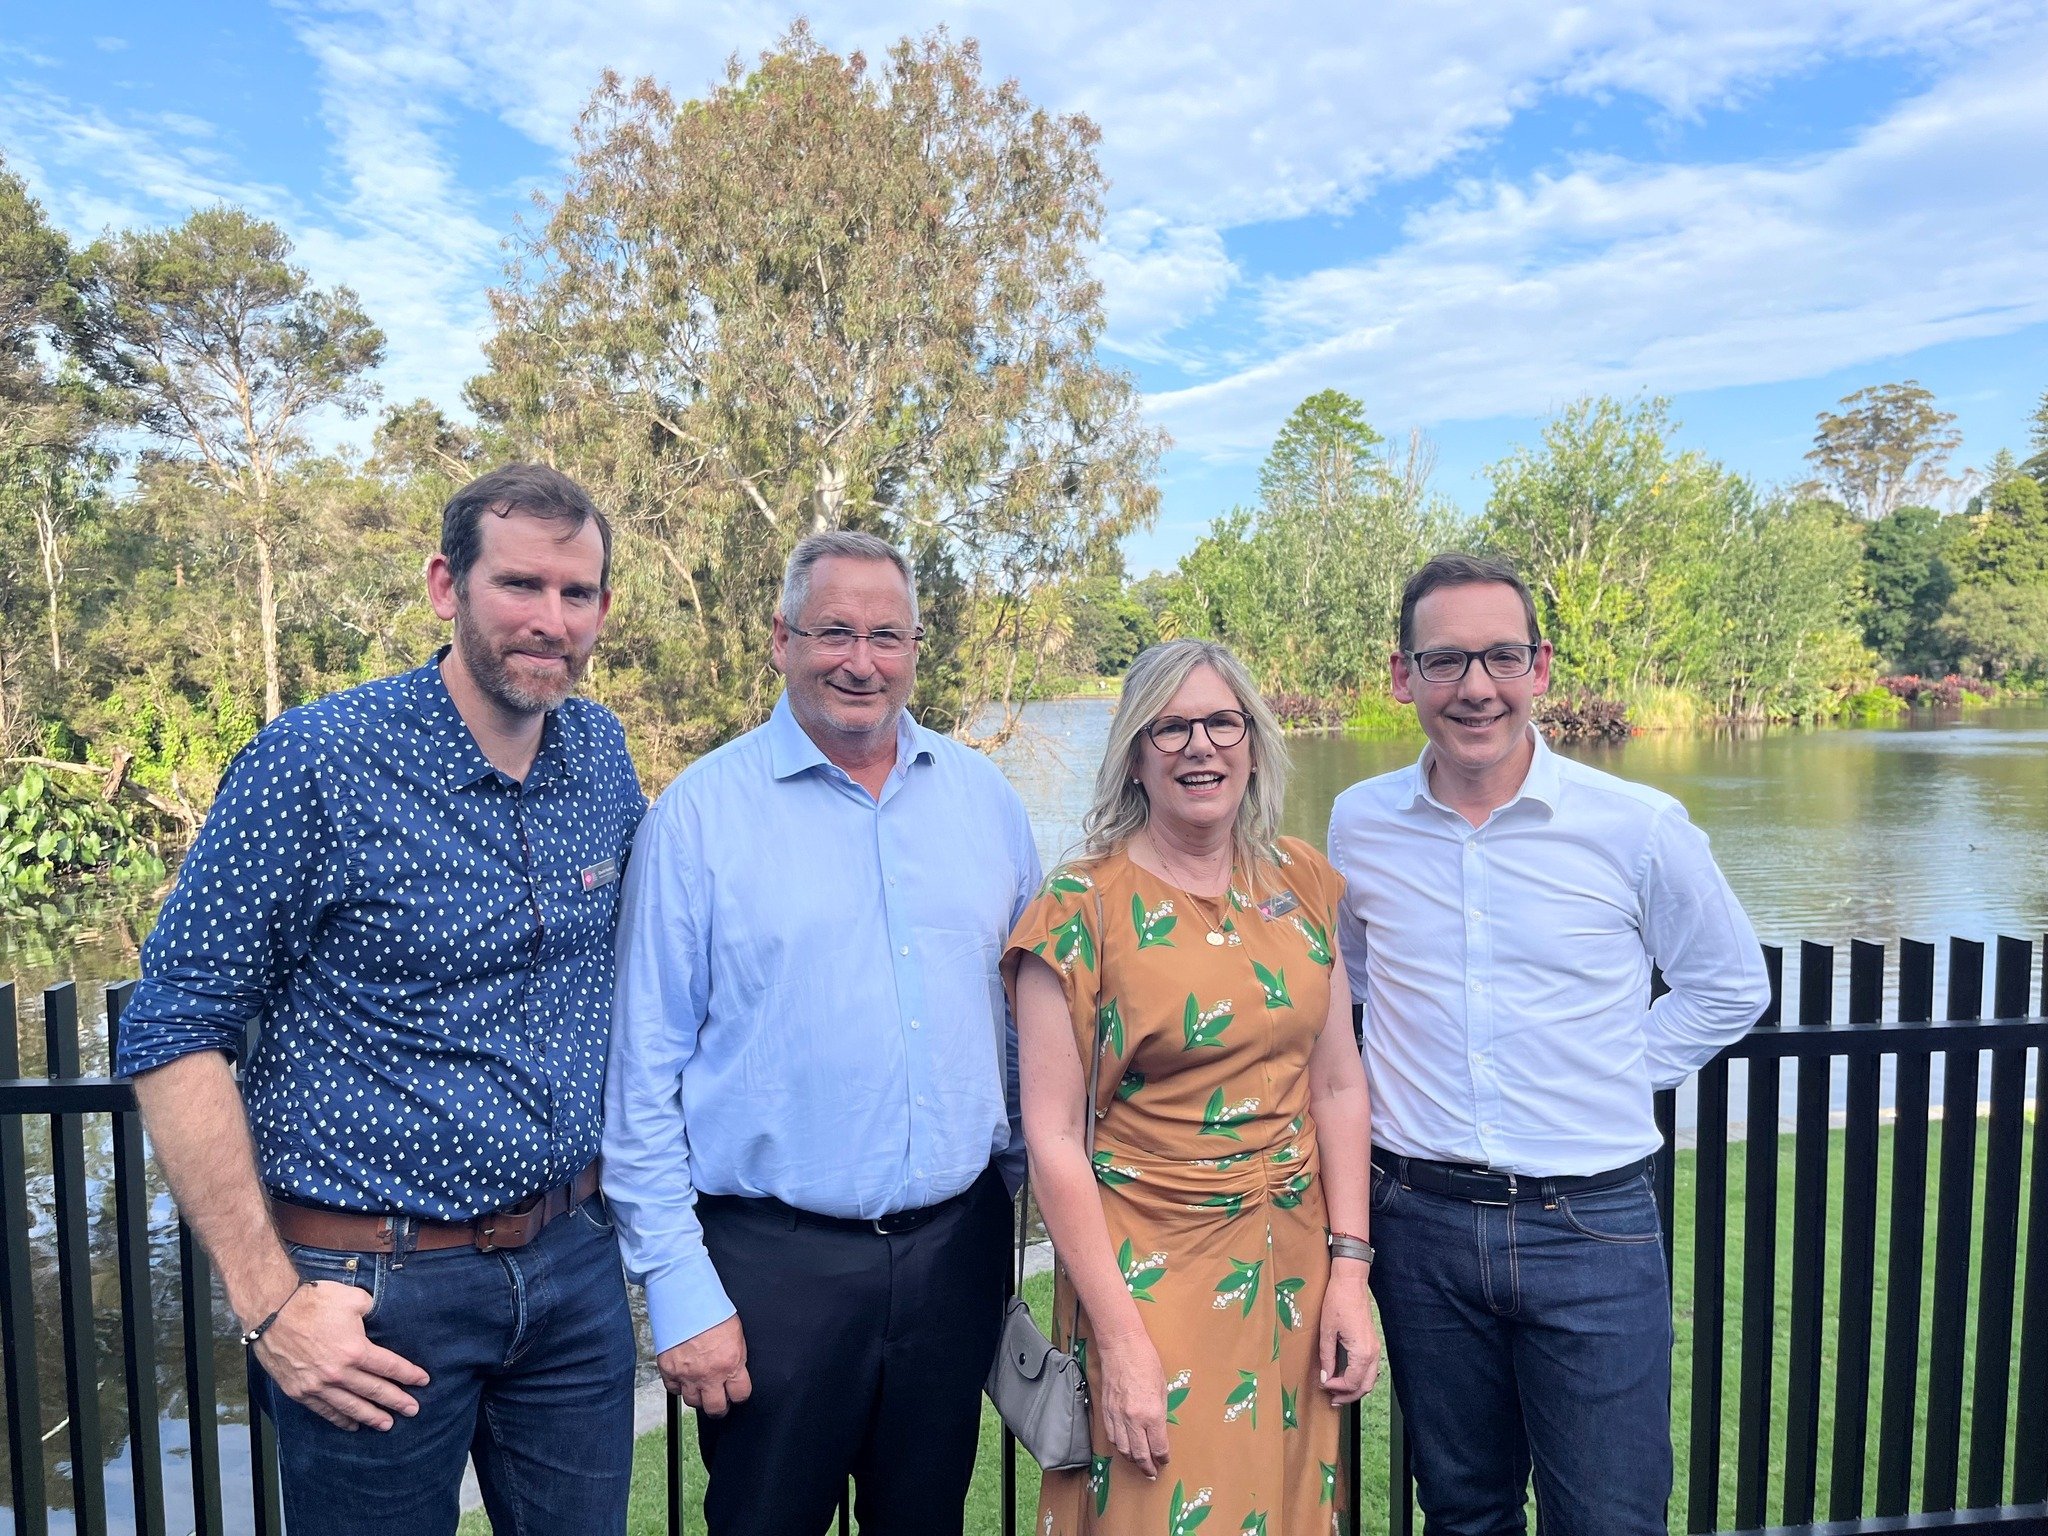 Last week I visited the Dog Flat Marquee, in the heart of the Royal Botanic Gardens, with the Minister for Environment @steve_dimopoulos.

And I was reminded just how lucky we are to live in Melbourne.